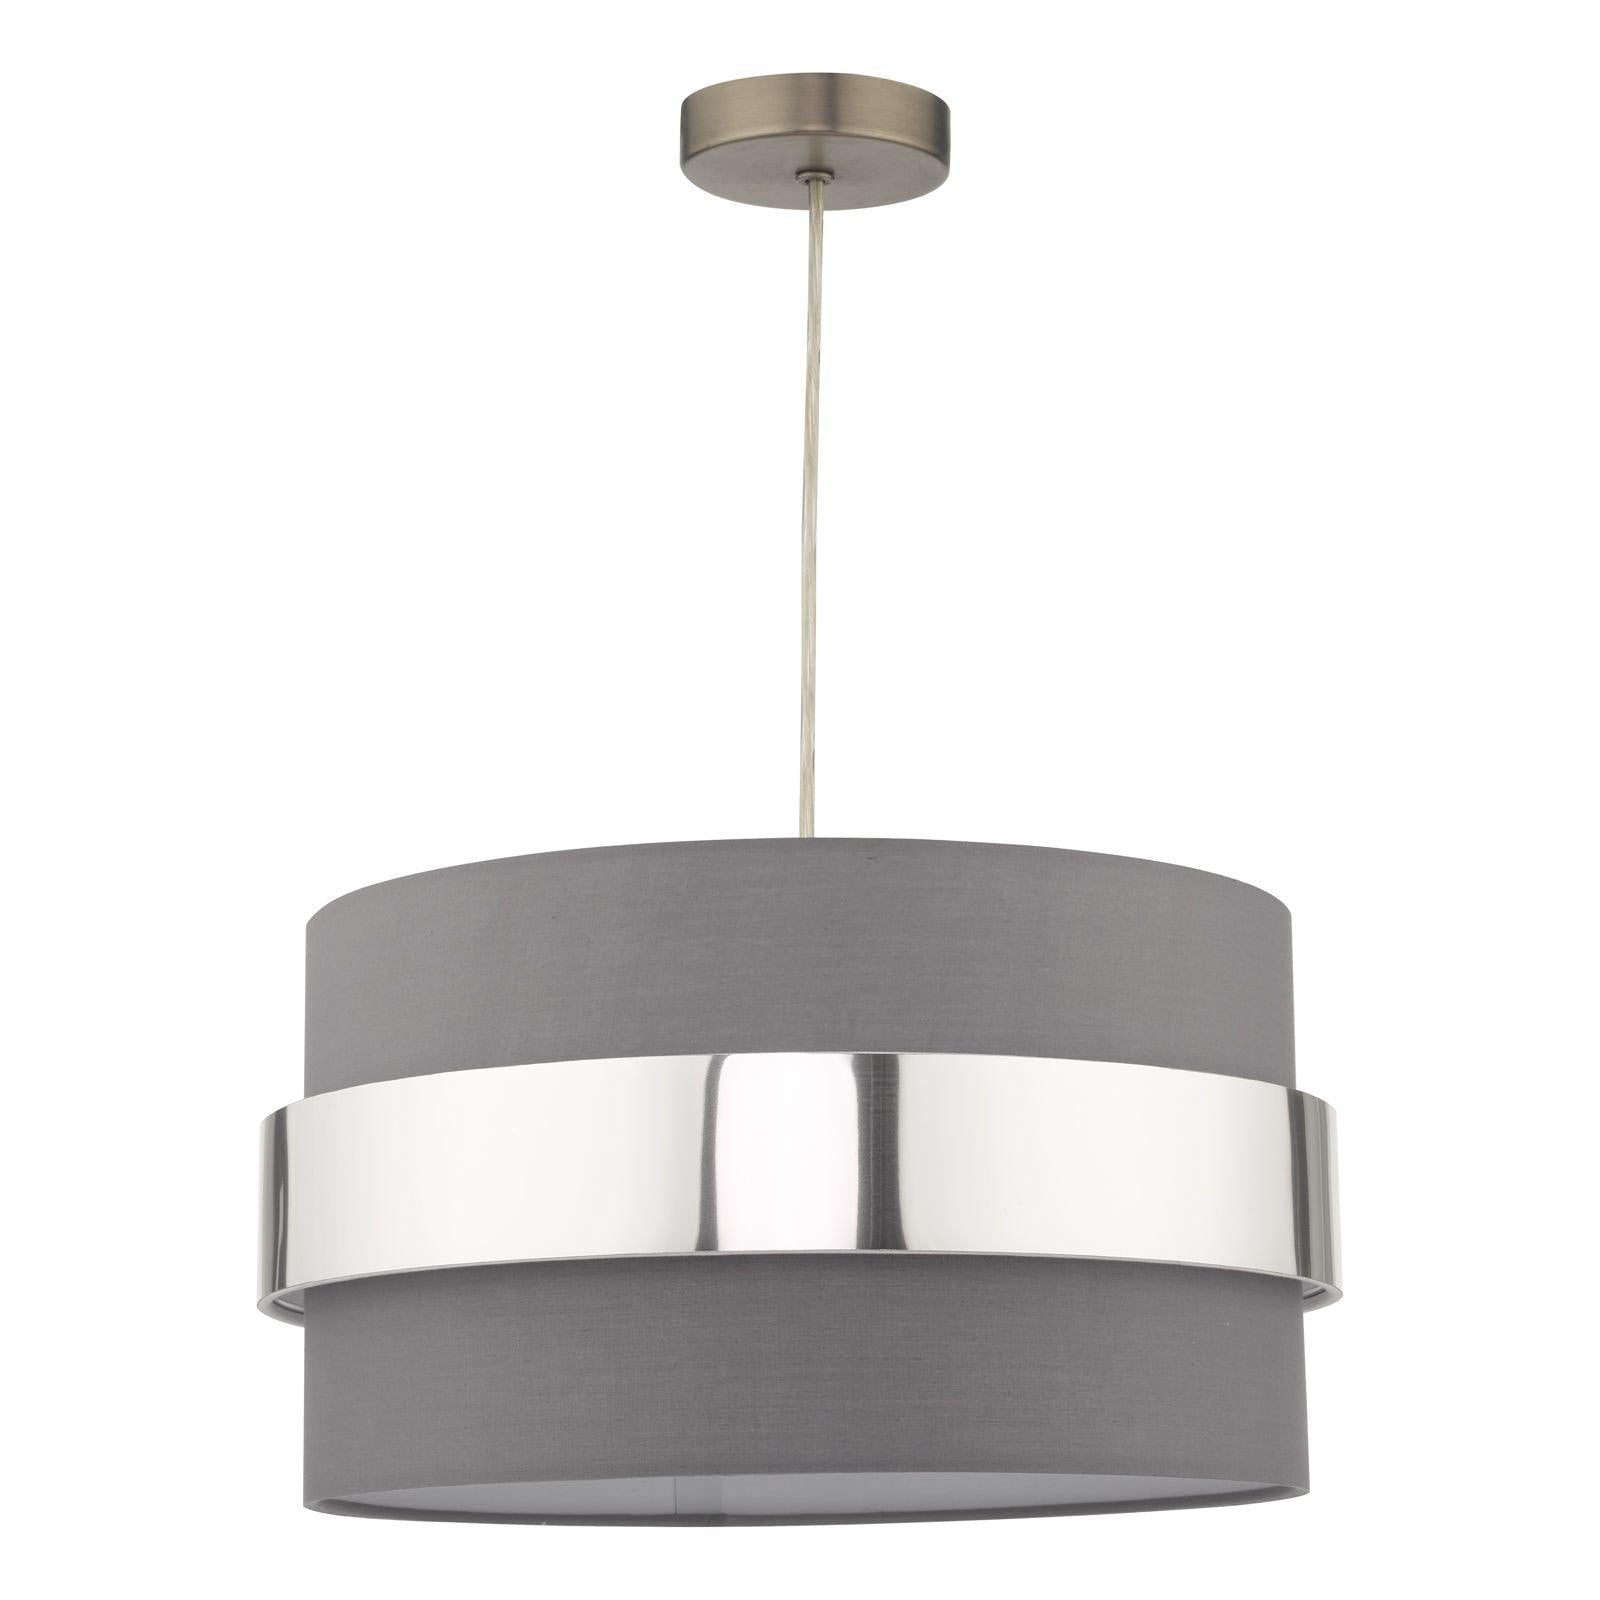 Oki Easy Fit Grey Shade with Chrome Band - Peter Murphy Lighting & Electrical Ltd